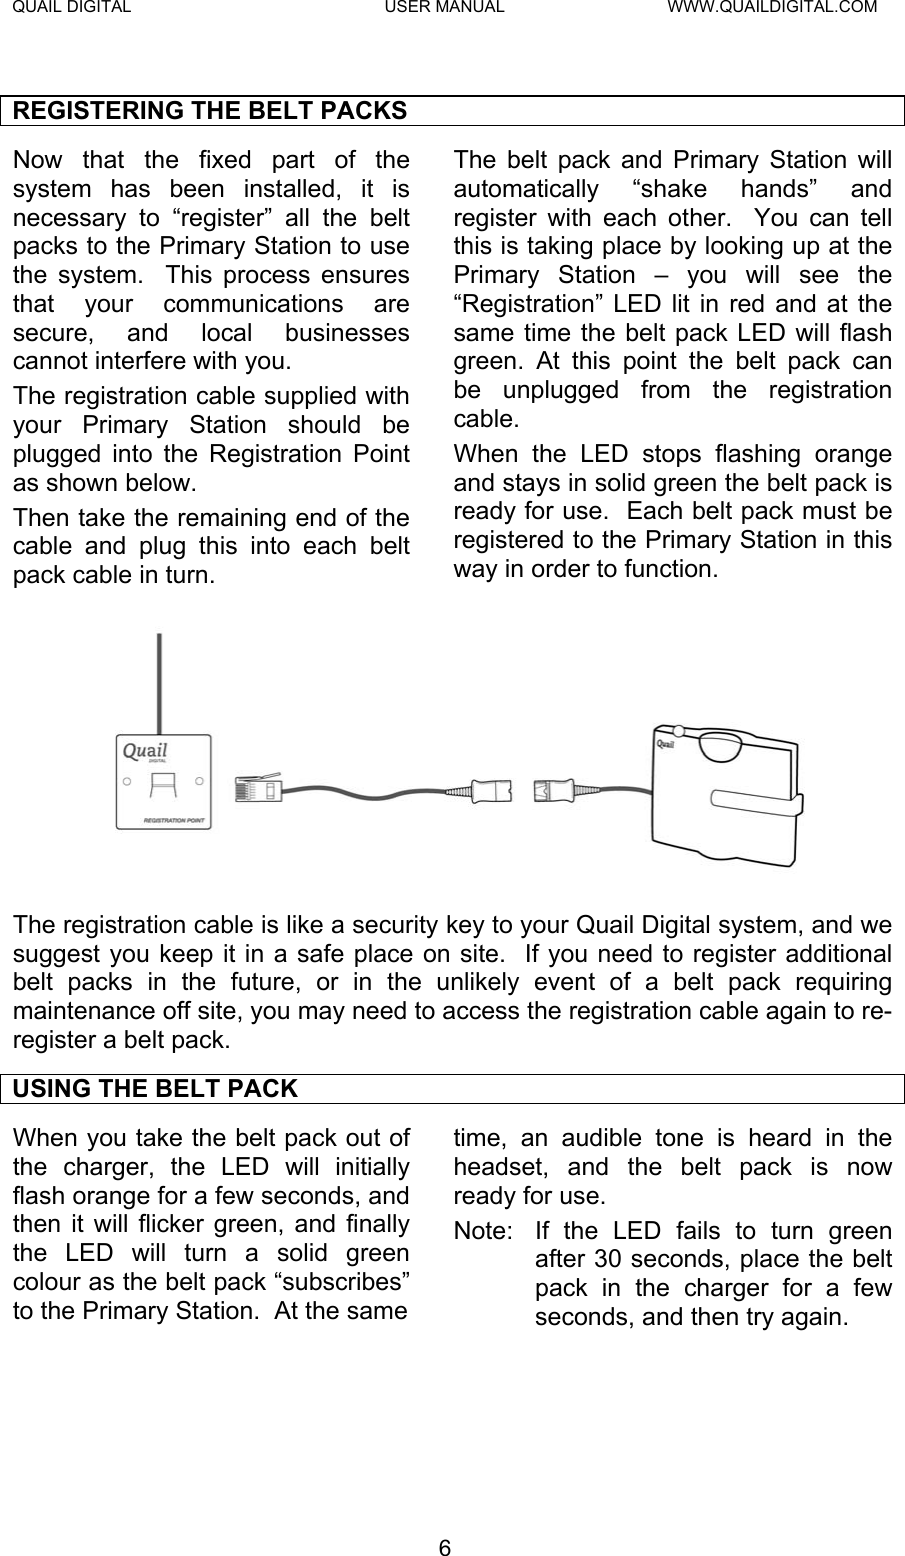 QUAIL DIGITAL  USER MANUAL  WWW.QUAILDIGITAL.COM  REGISTERING THE BELT PACKS Now that the fixed part of the system has been installed, it is necessary to “register” all the belt packs to the Primary Station to use the system.  This process ensures that your communications are secure, and local businesses cannot interfere with you. The registration cable supplied with your Primary Station should be plugged into the Registration Point as shown below. Then take the remaining end of the cable and plug this into each belt pack cable in turn.   The belt pack and Primary Station will automatically “shake hands” and register with each other.  You can tell this is taking place by looking up at the Primary Station – you will see the “Registration” LED lit in red and at the same time the belt pack LED will flash green. At this point the belt pack can be unplugged from the registration cable.  When the LED stops flashing orange and stays in solid green the belt pack is ready for use.  Each belt pack must be registered to the Primary Station in this way in order to function.  The registration cable is like a security key to your Quail Digital system, and we suggest you keep it in a safe place on site.  If you need to register additional belt packs in the future, or in the unlikely event of a belt pack requiring maintenance off site, you may need to access the registration cable again to re-register a belt pack. USING THE BELT PACK When you take the belt pack out of the charger, the LED will initially flash orange for a few seconds, and then it will flicker green, and finally the LED will turn a solid green colour as the belt pack “subscribes” to the Primary Station.  At the same time, an audible tone is heard in the headset, and the belt pack is now ready for use.   Note:  If the LED fails to turn green after 30 seconds, place the belt pack in the charger for a few seconds, and then try again.  6  